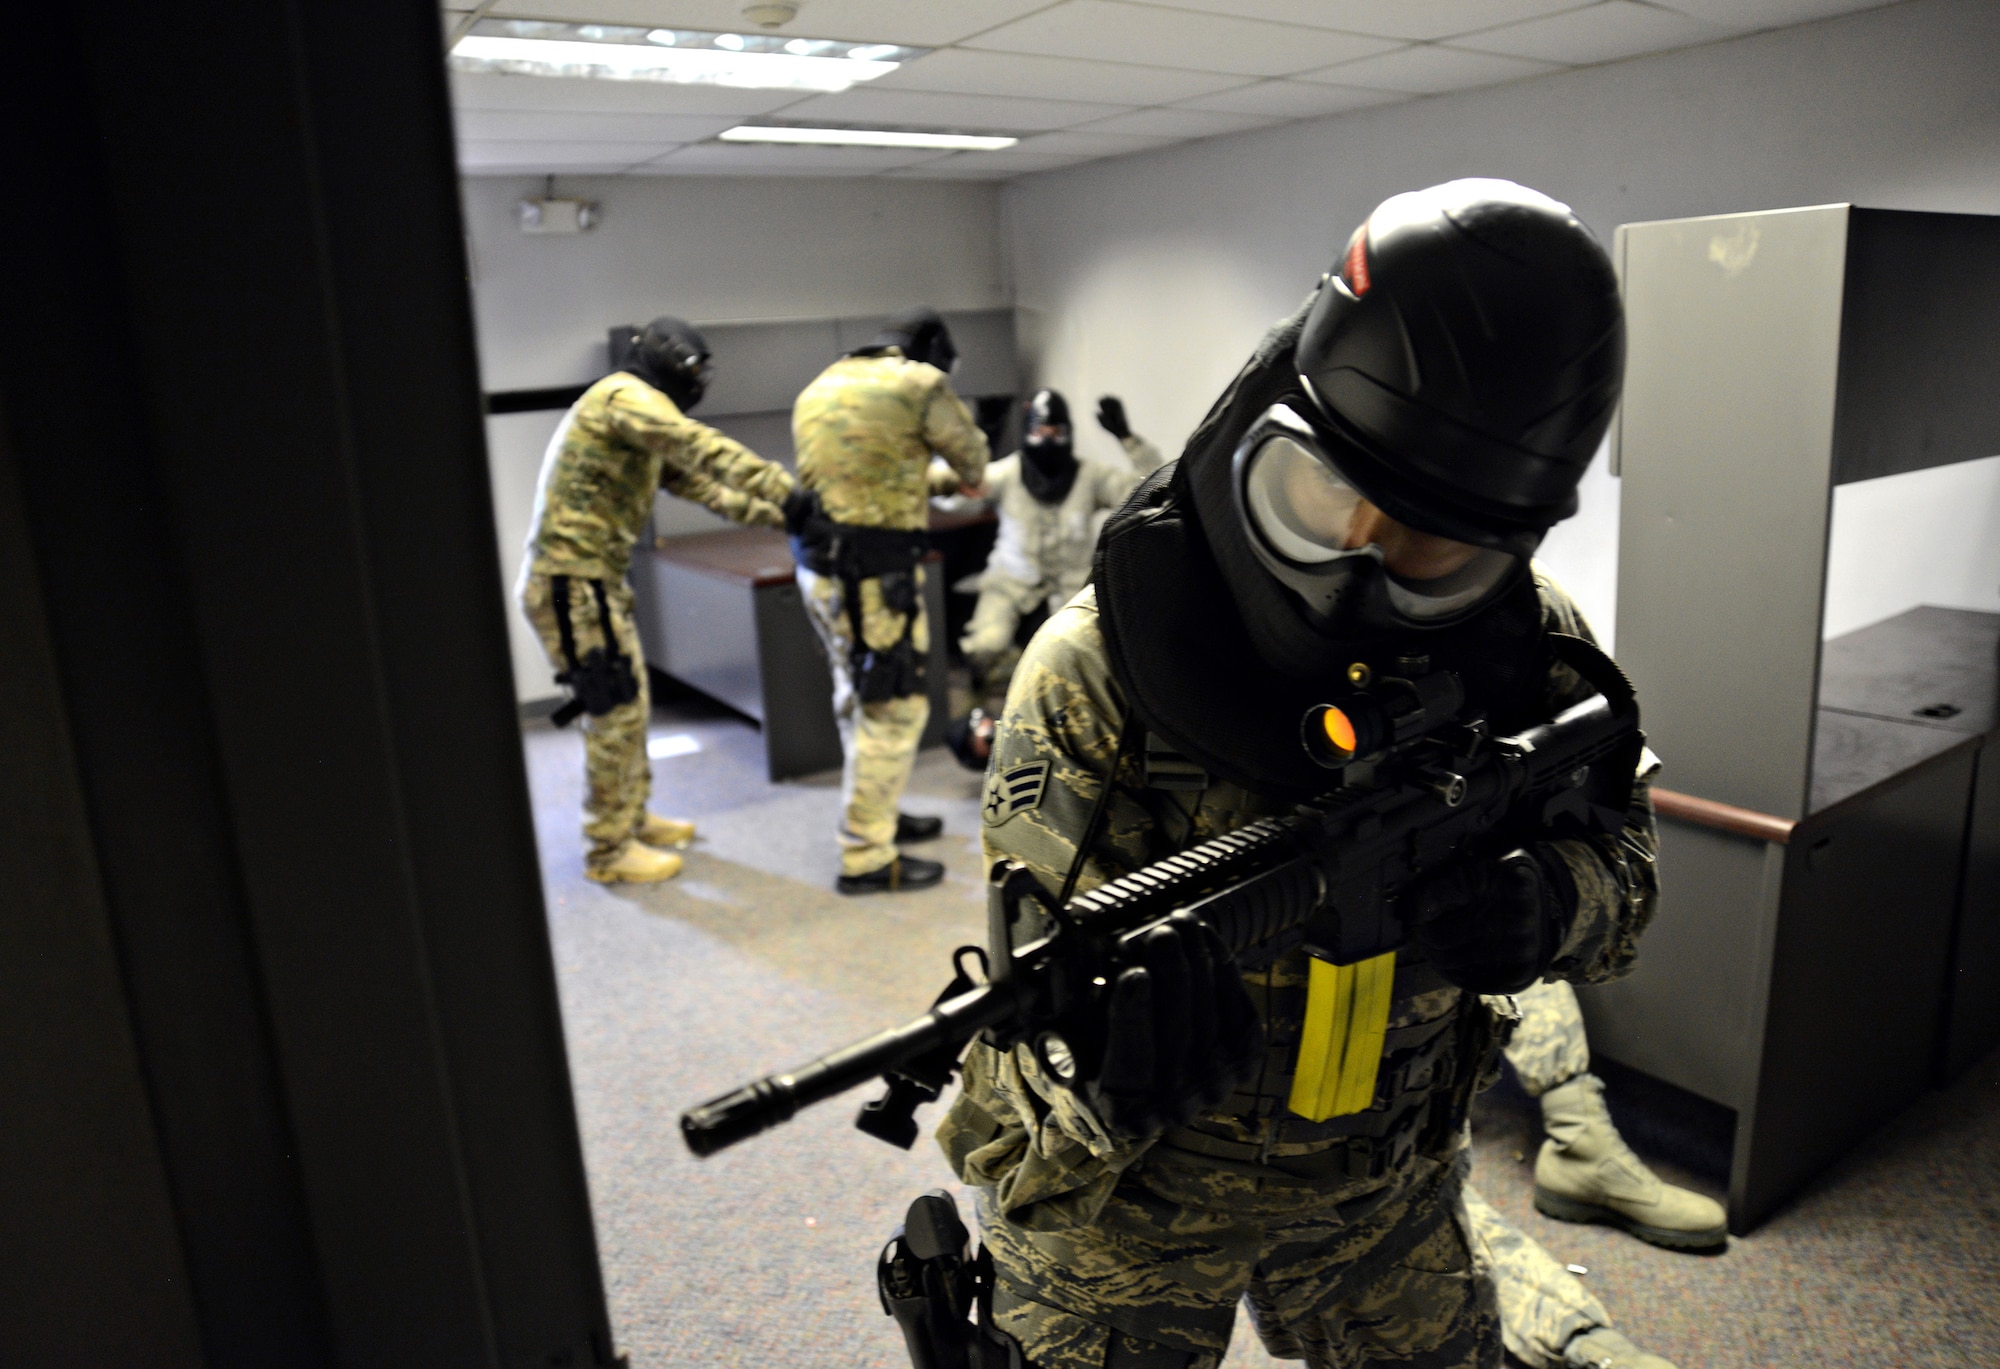 With one threat identified, a Tinker Airman continues to sweep the area for more subjects during active shooter training. (Air Force photo by Kelly White)